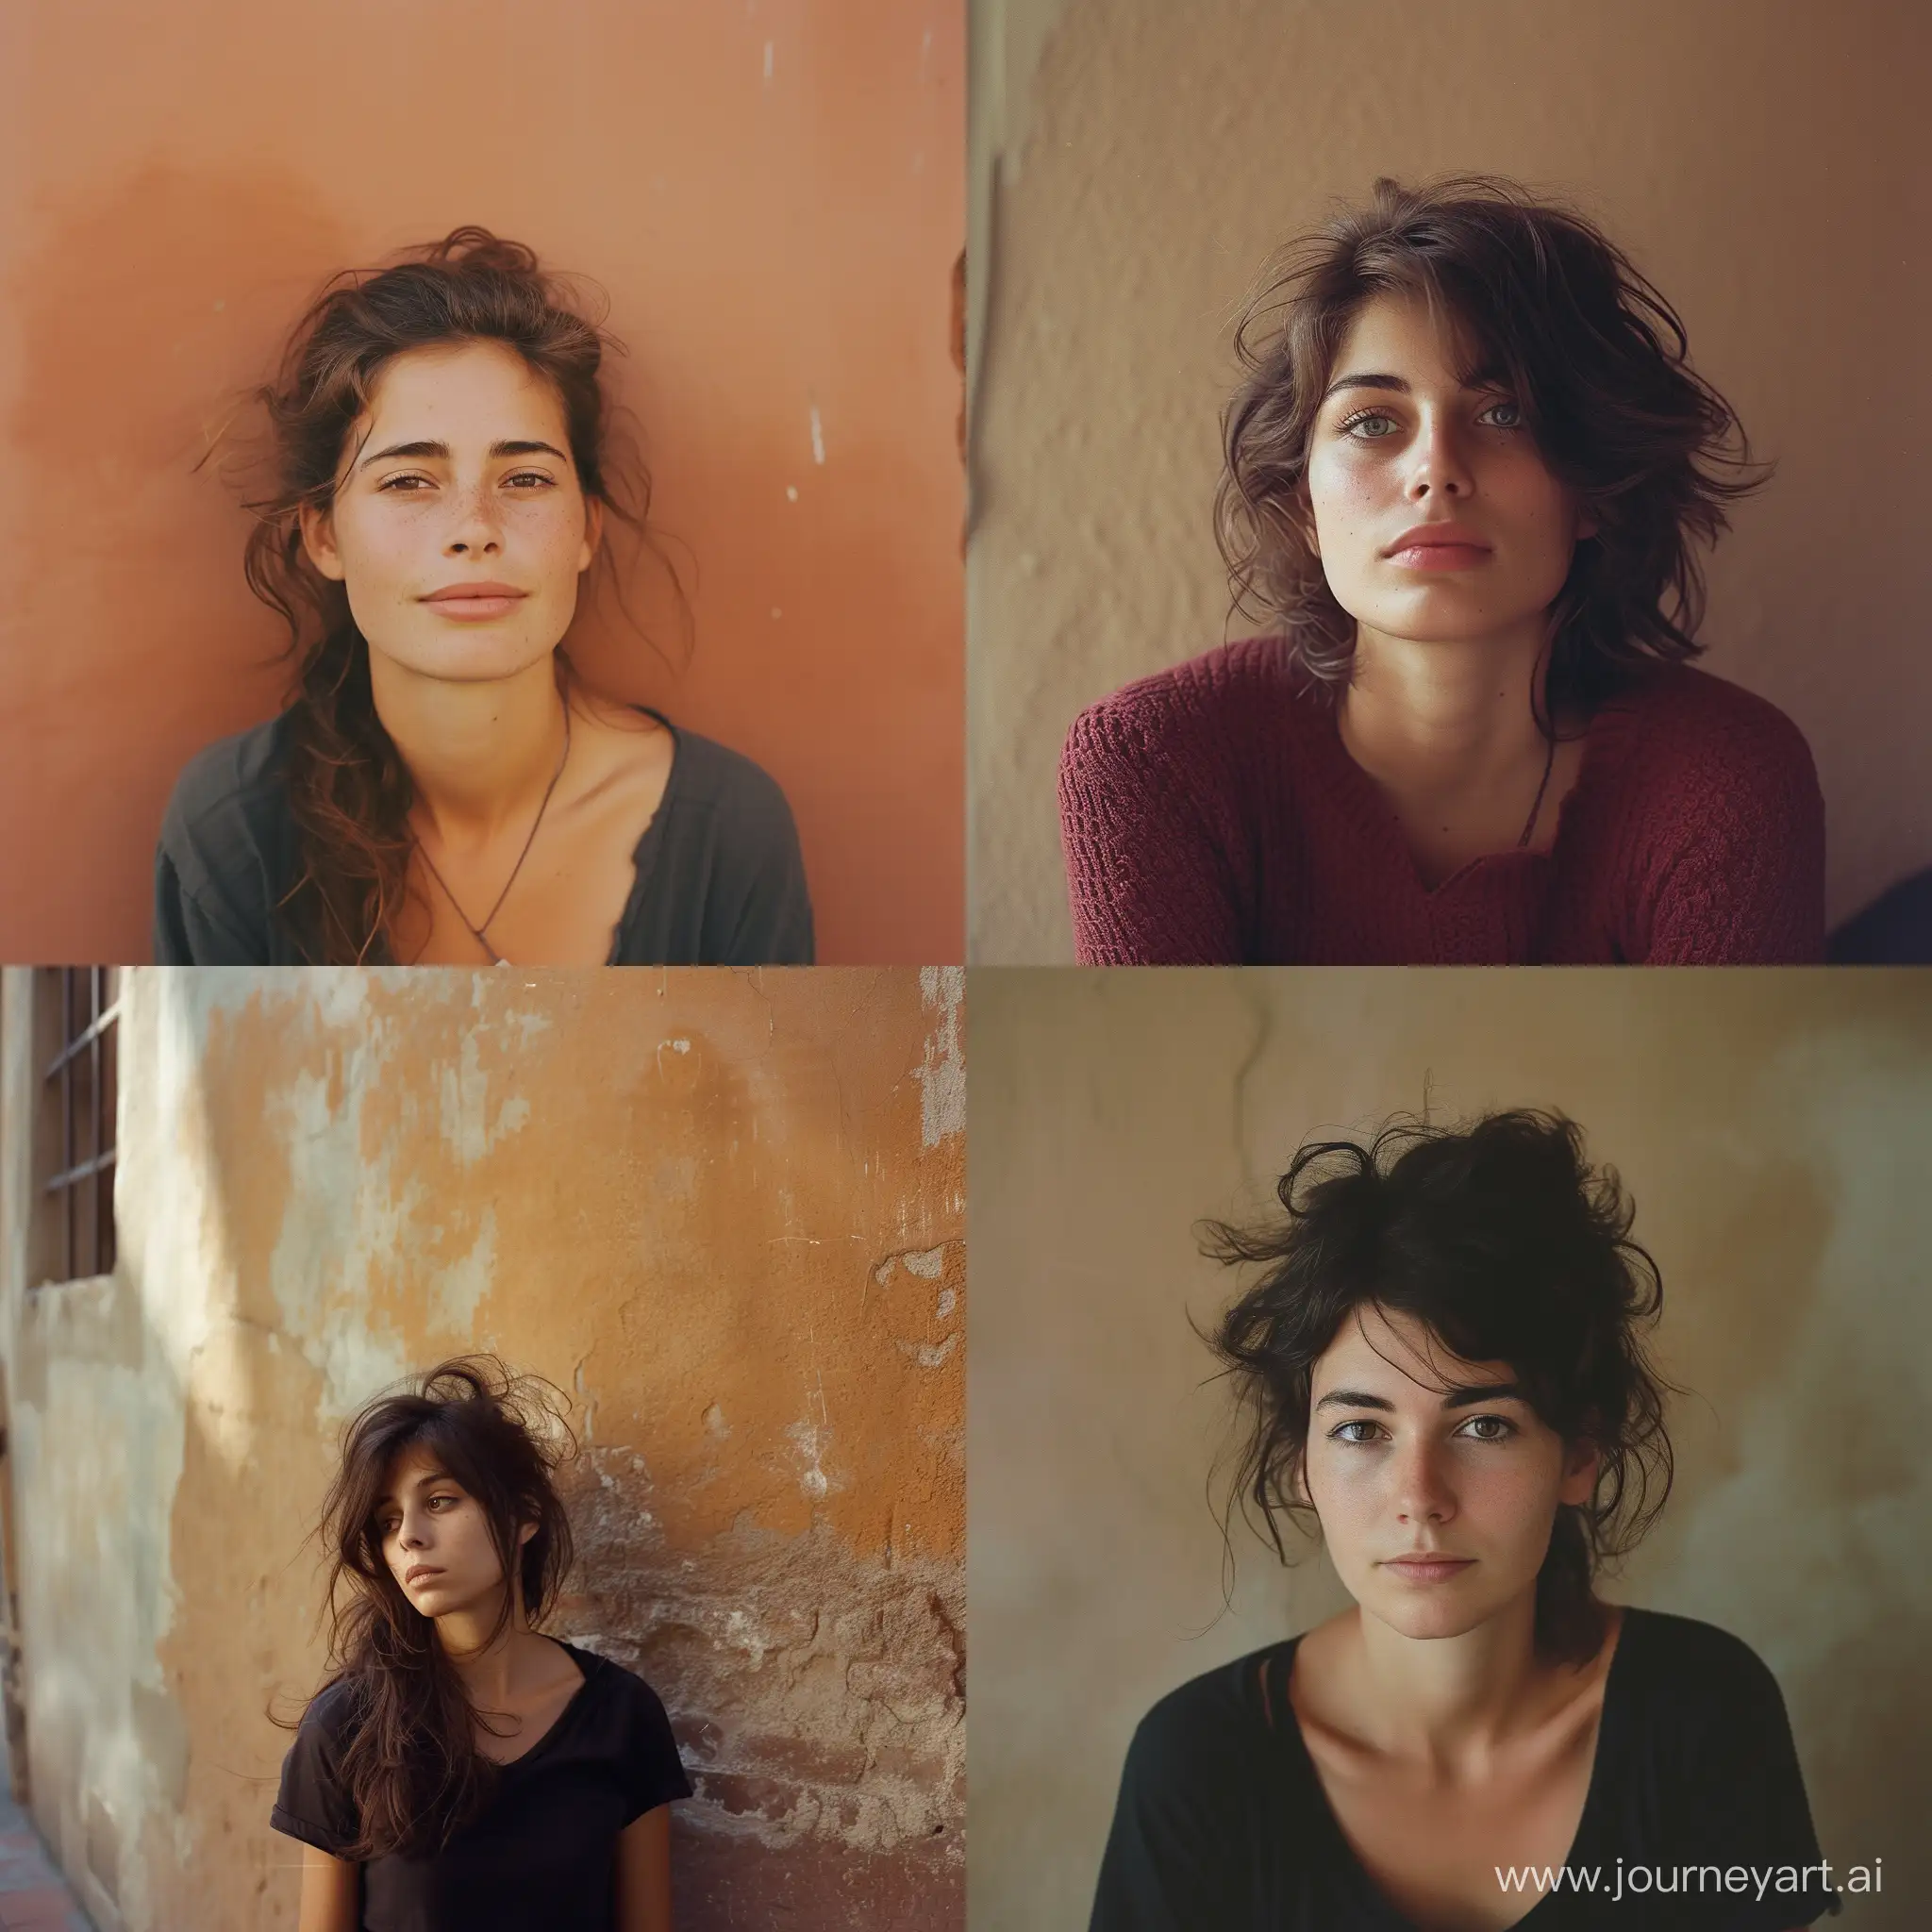 Stylish-40YearOld-Italian-Woman-with-Messy-Hair-in-Cinematic-Summer-Light